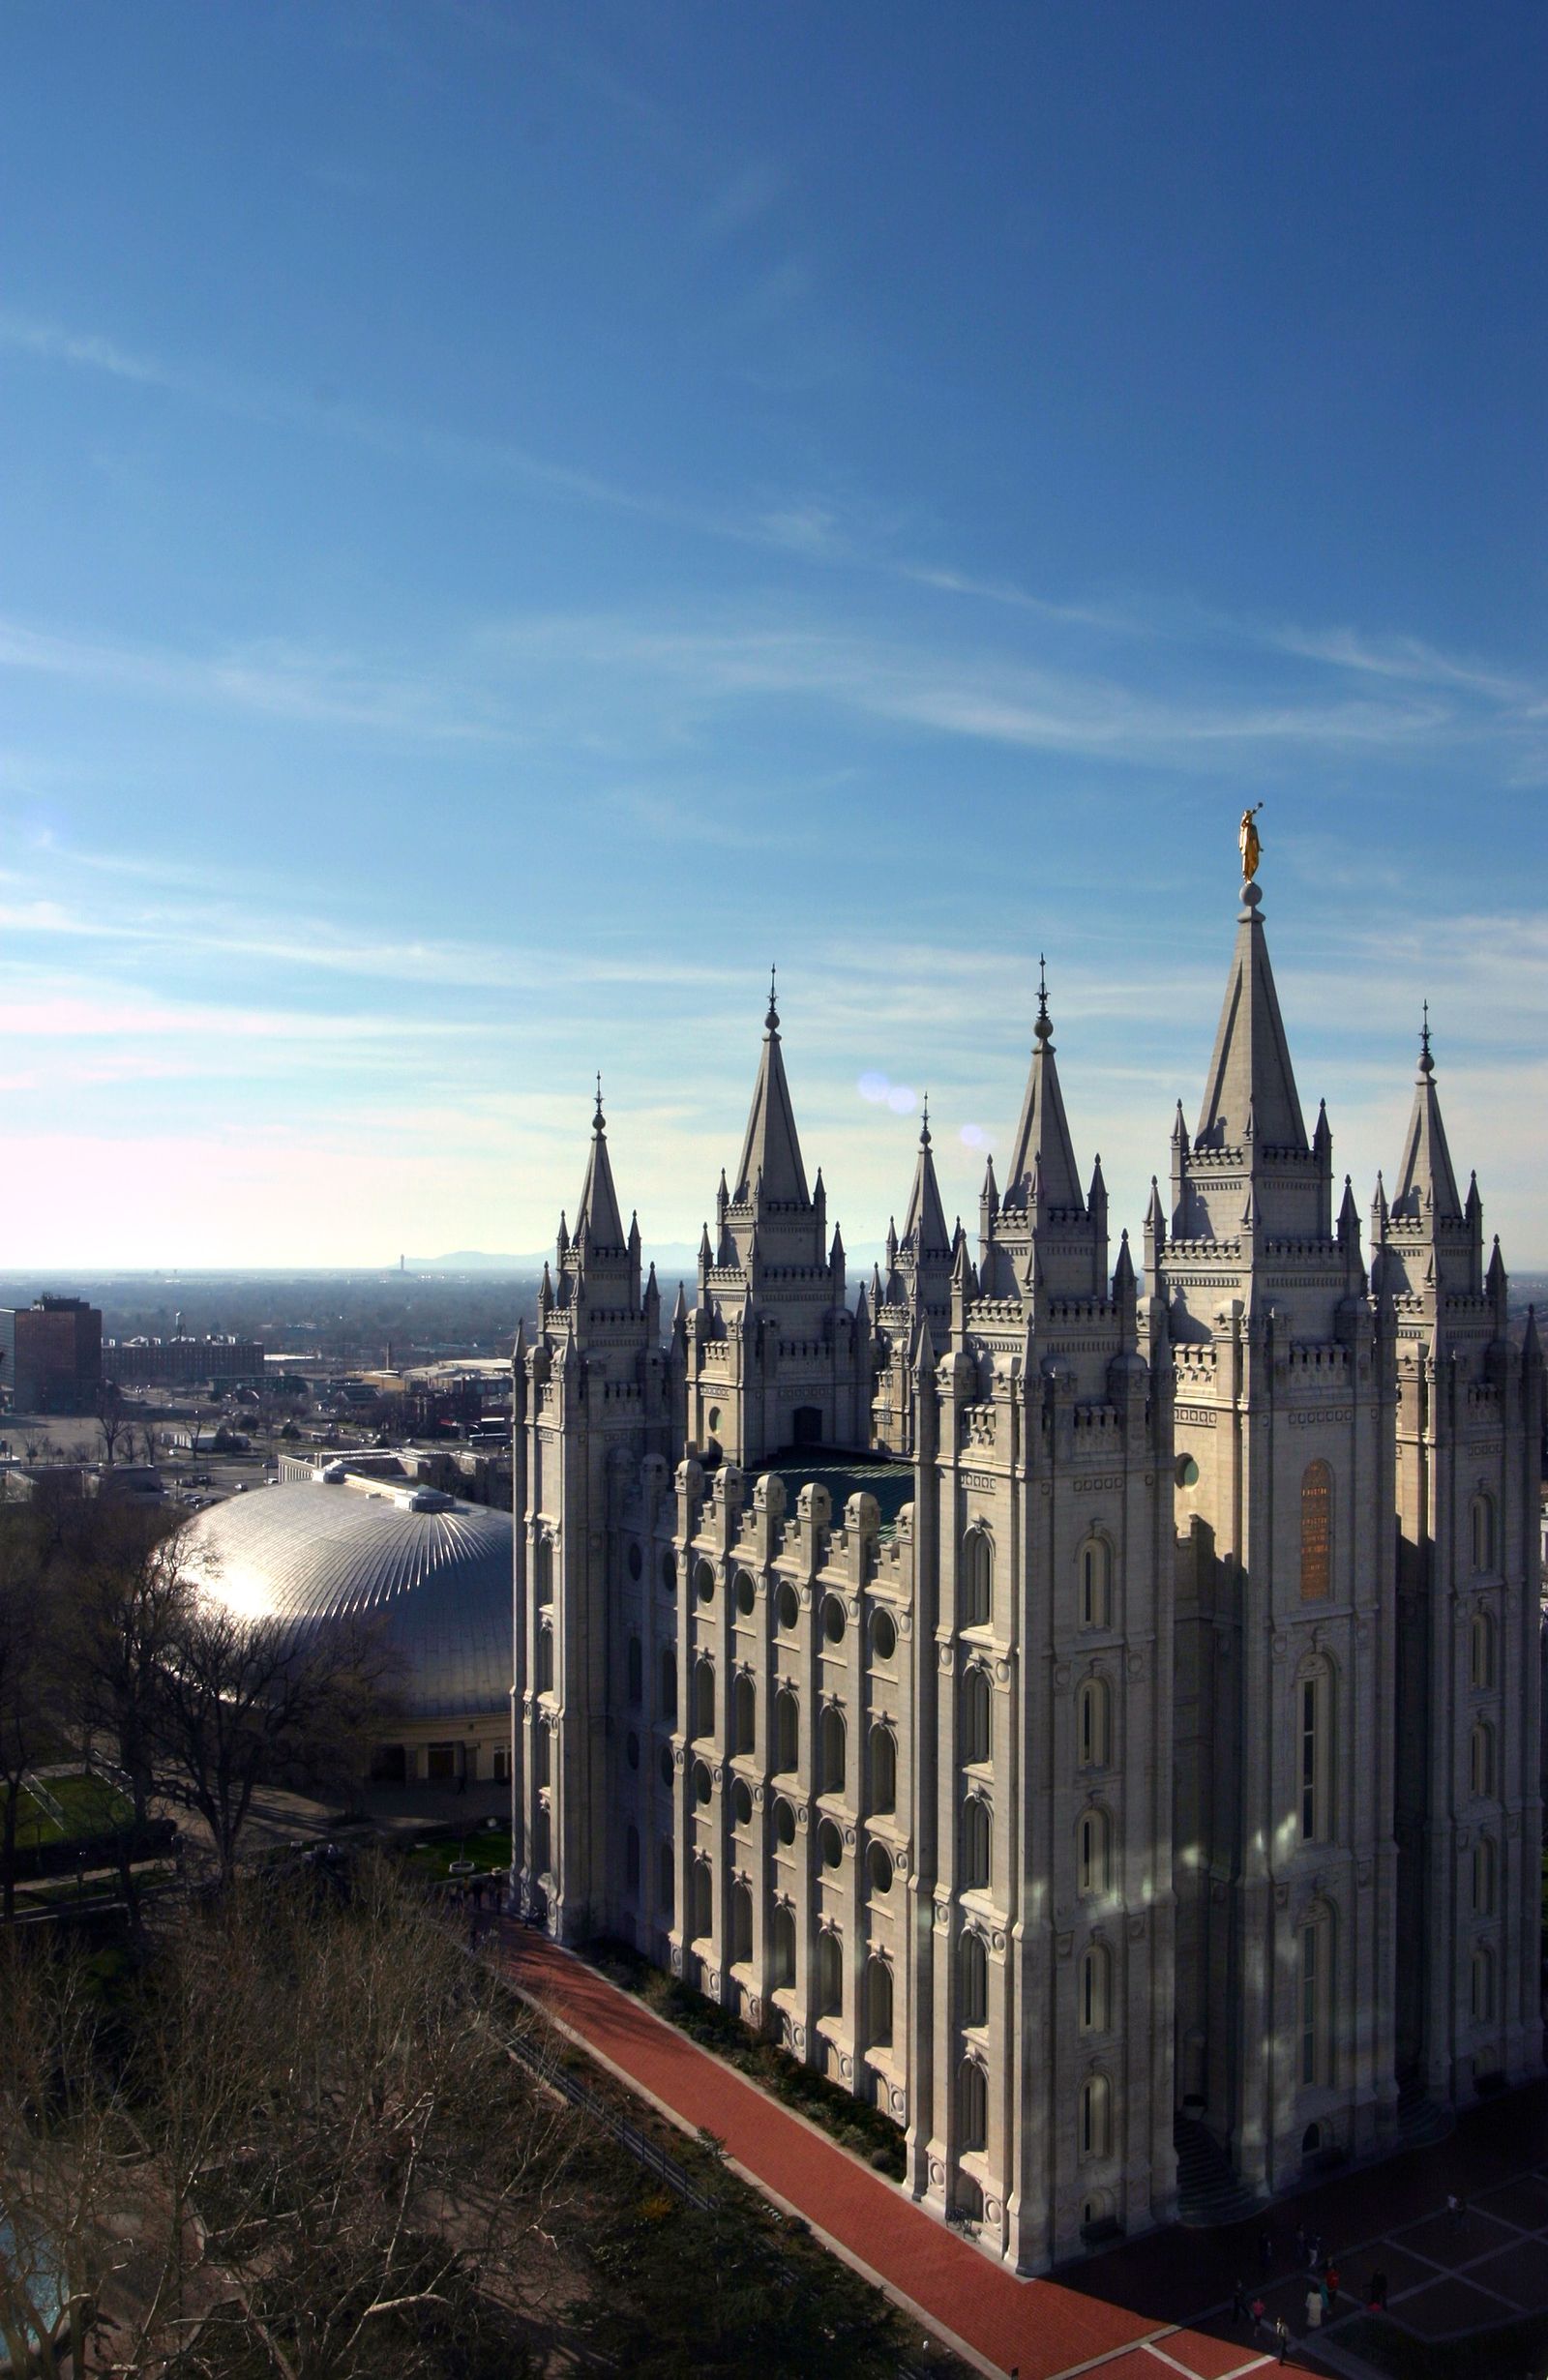 The entire Salt Lake Temple, including scenery.